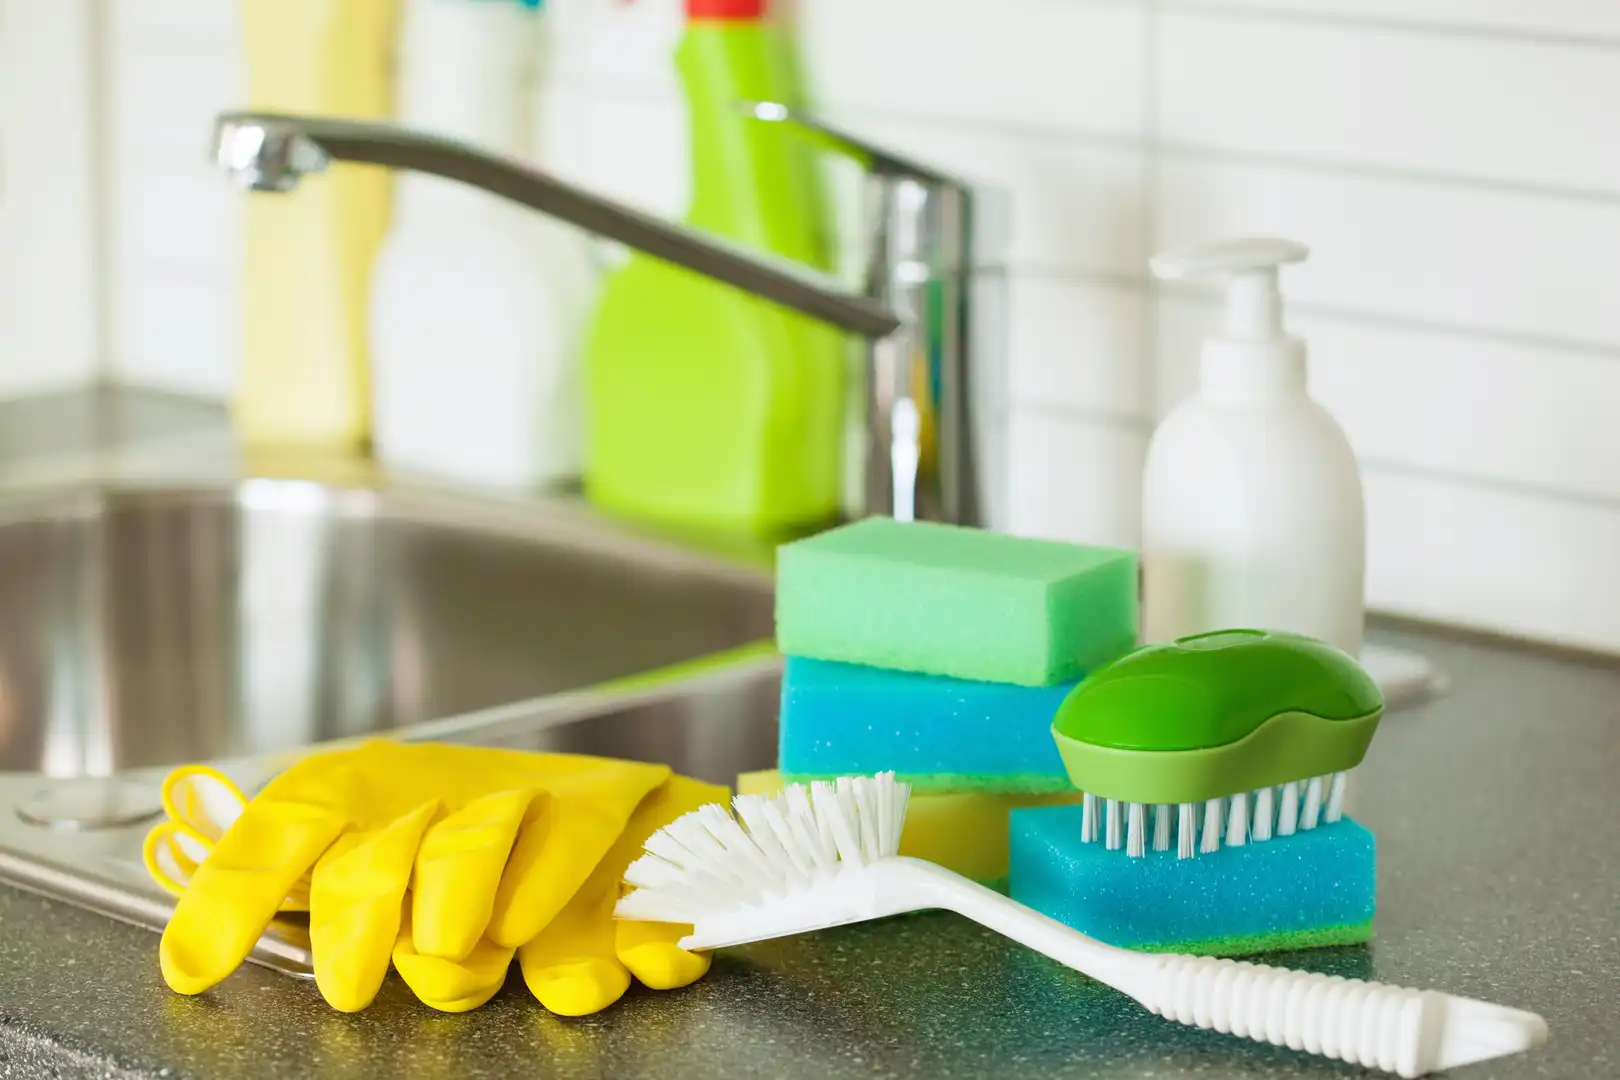 Must-Have Essential Items Every Household Needs to Make Your Home Sparkly Clean